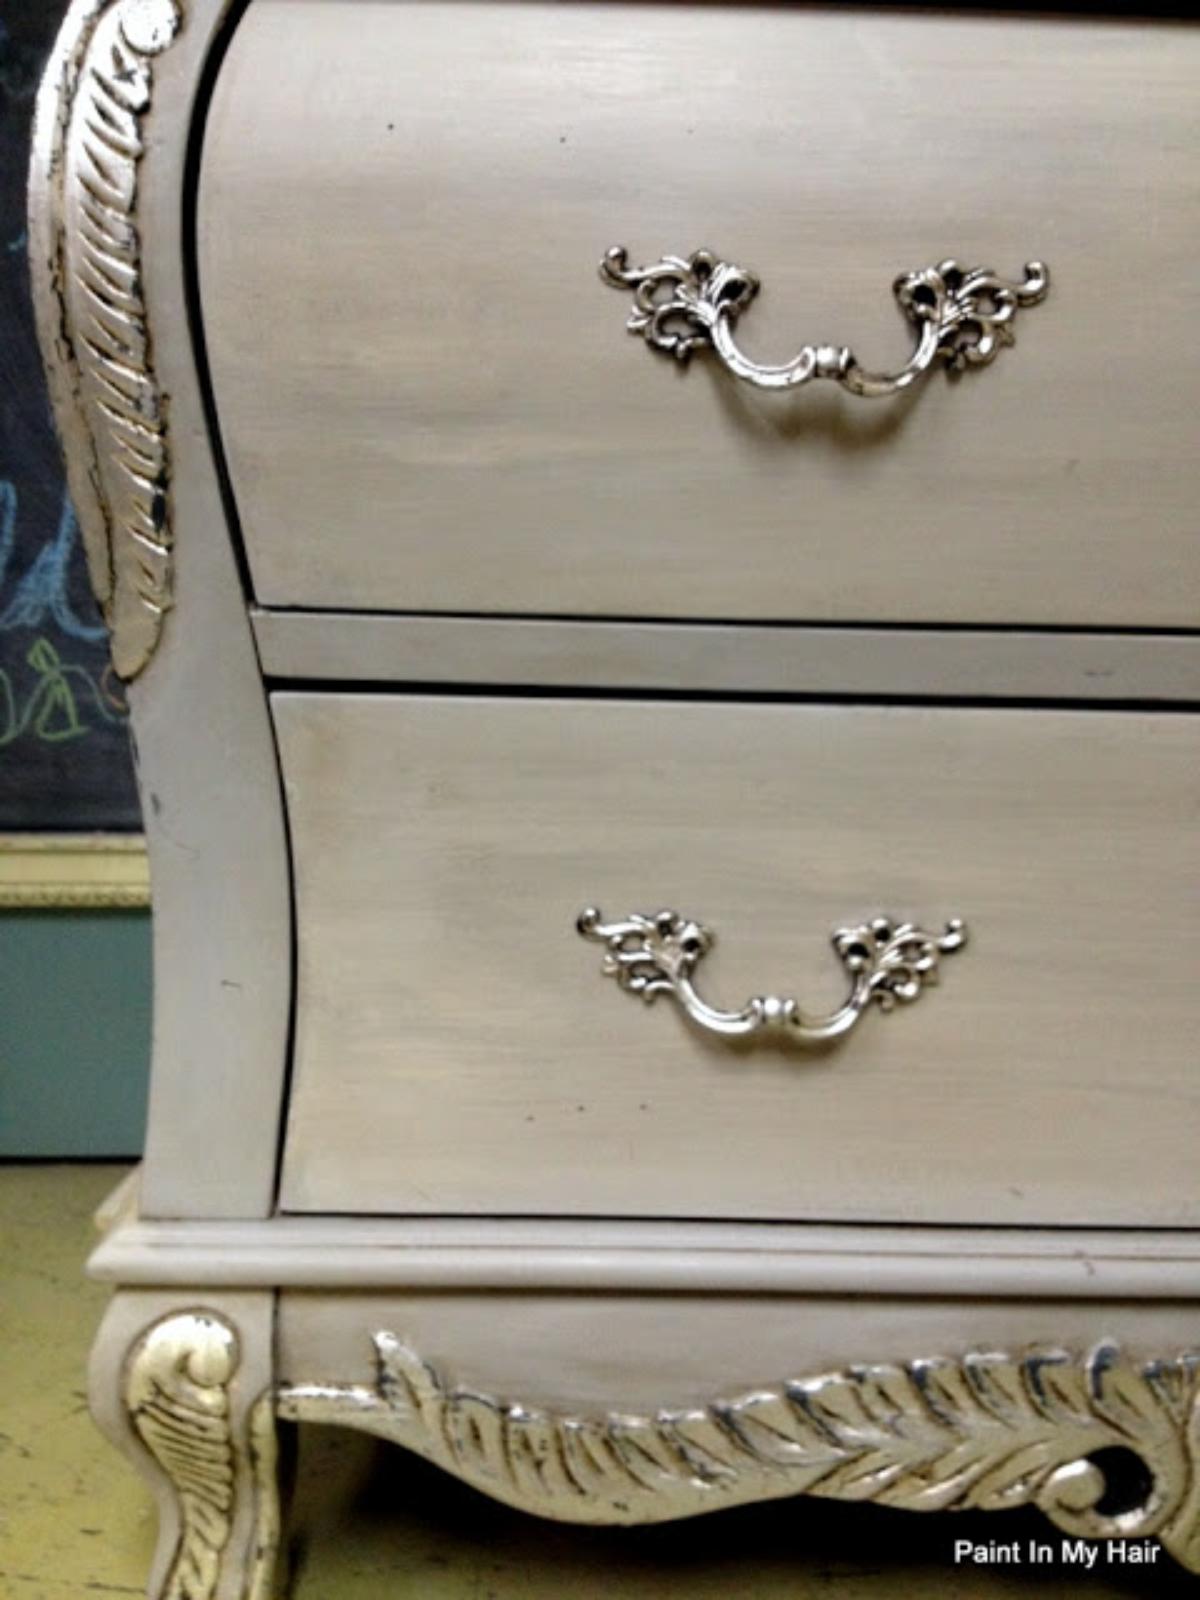 Refinish That Dresser Yourself – Beautiful DIY Idea for Old Furniture